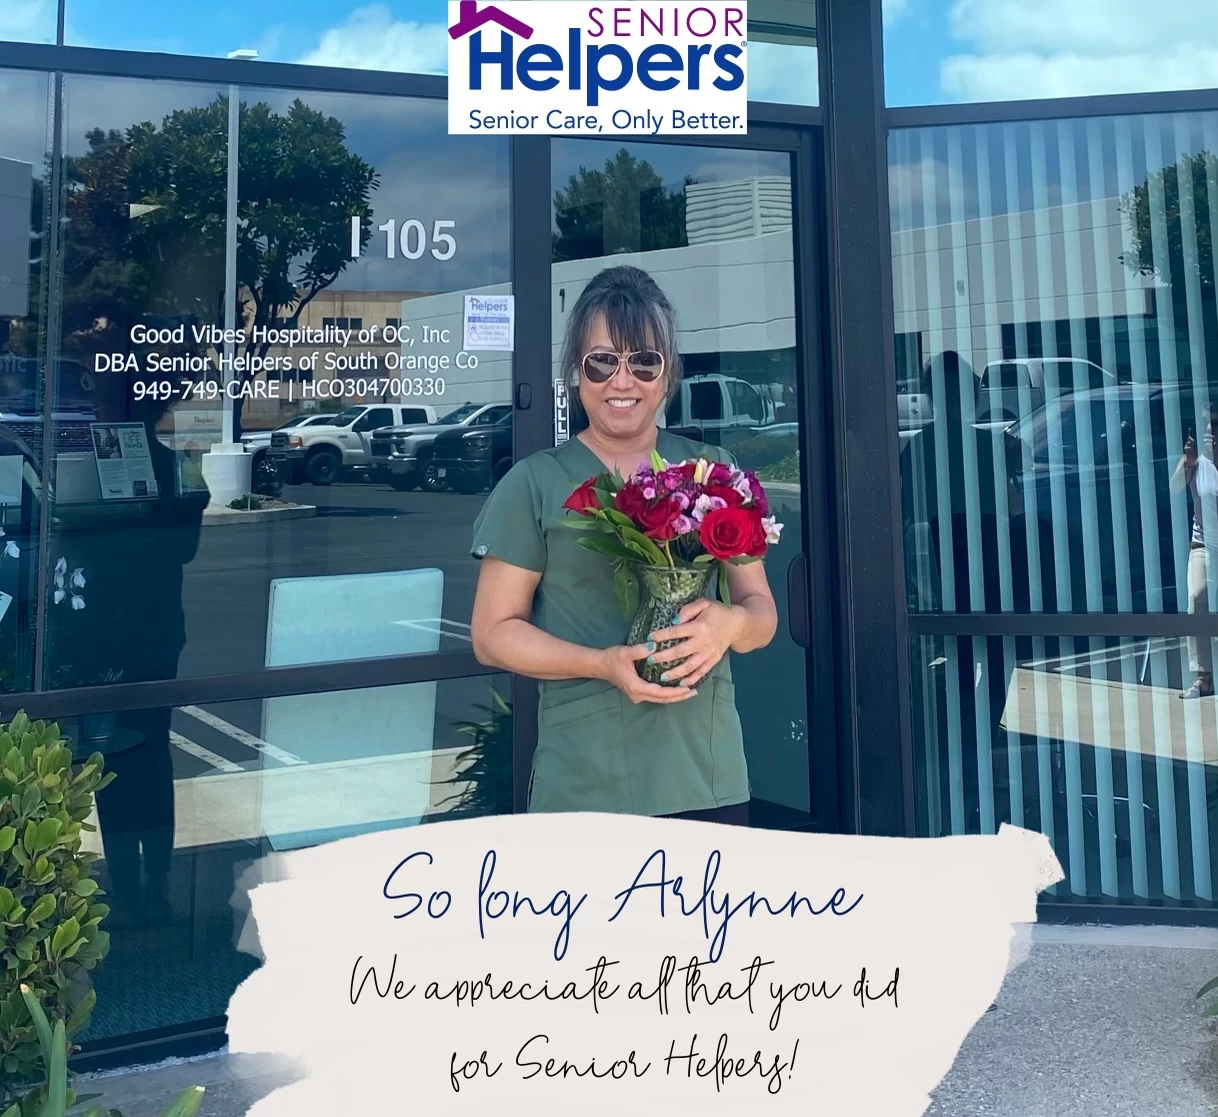 It’s a sad day when we have to say so long to such a cherished, dependable, and highly skilled Care Partner. But we know she is on to bigger things in a different part of California, and we couldn’t be happier for her. She’ll will be missed.